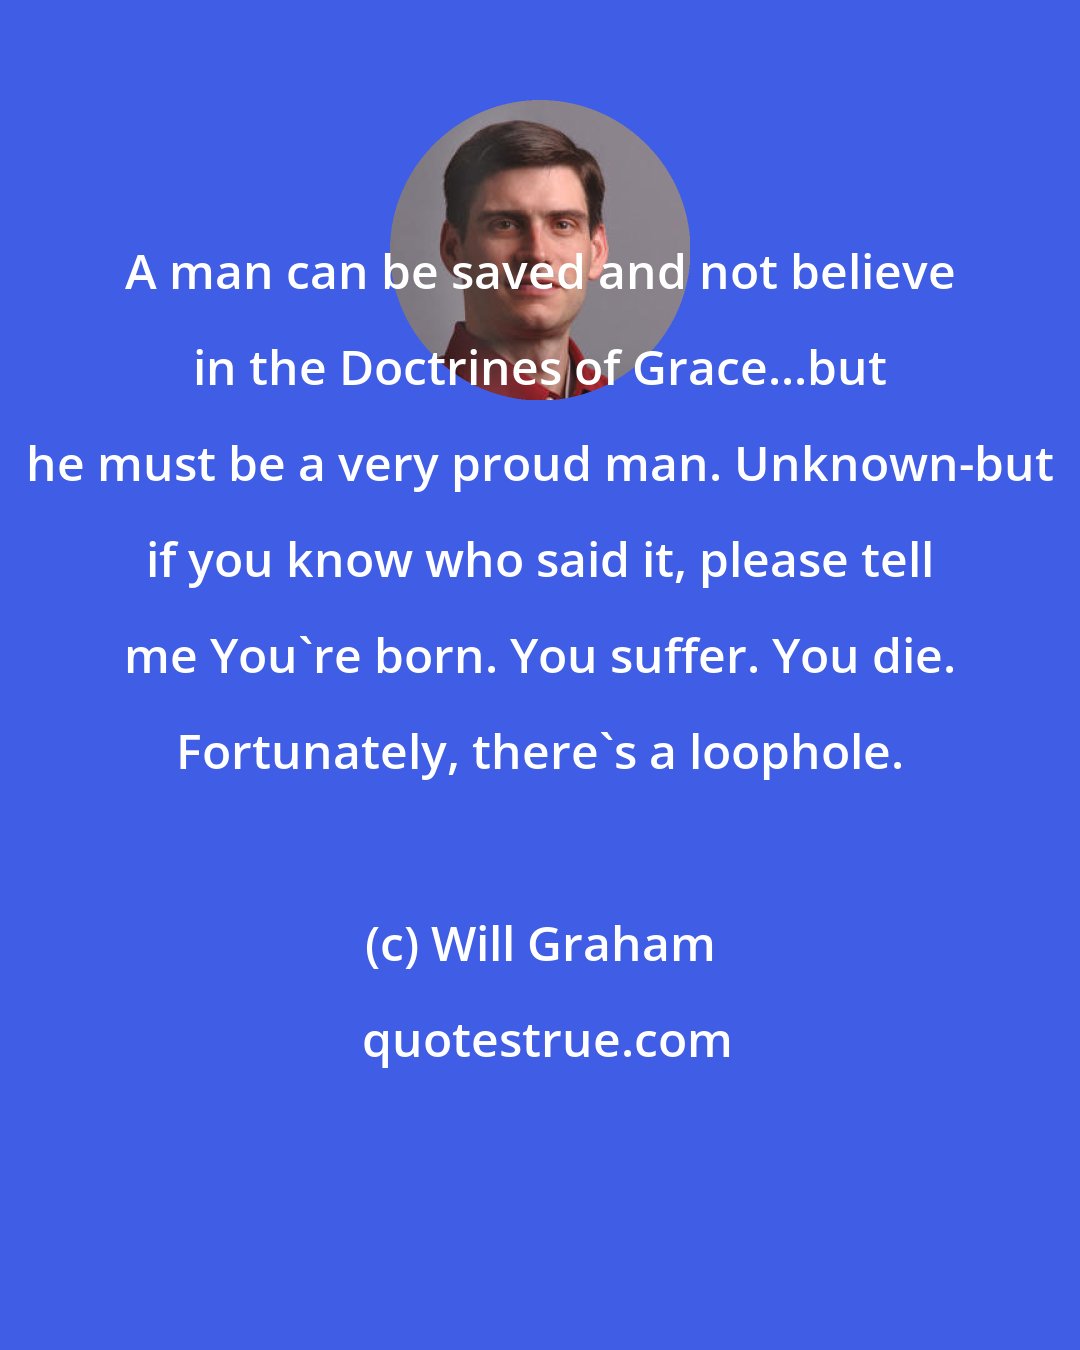 Will Graham: A man can be saved and not believe in the Doctrines of Grace...but he must be a very proud man. Unknown-but if you know who said it, please tell me You're born. You suffer. You die. Fortunately, there's a loophole.